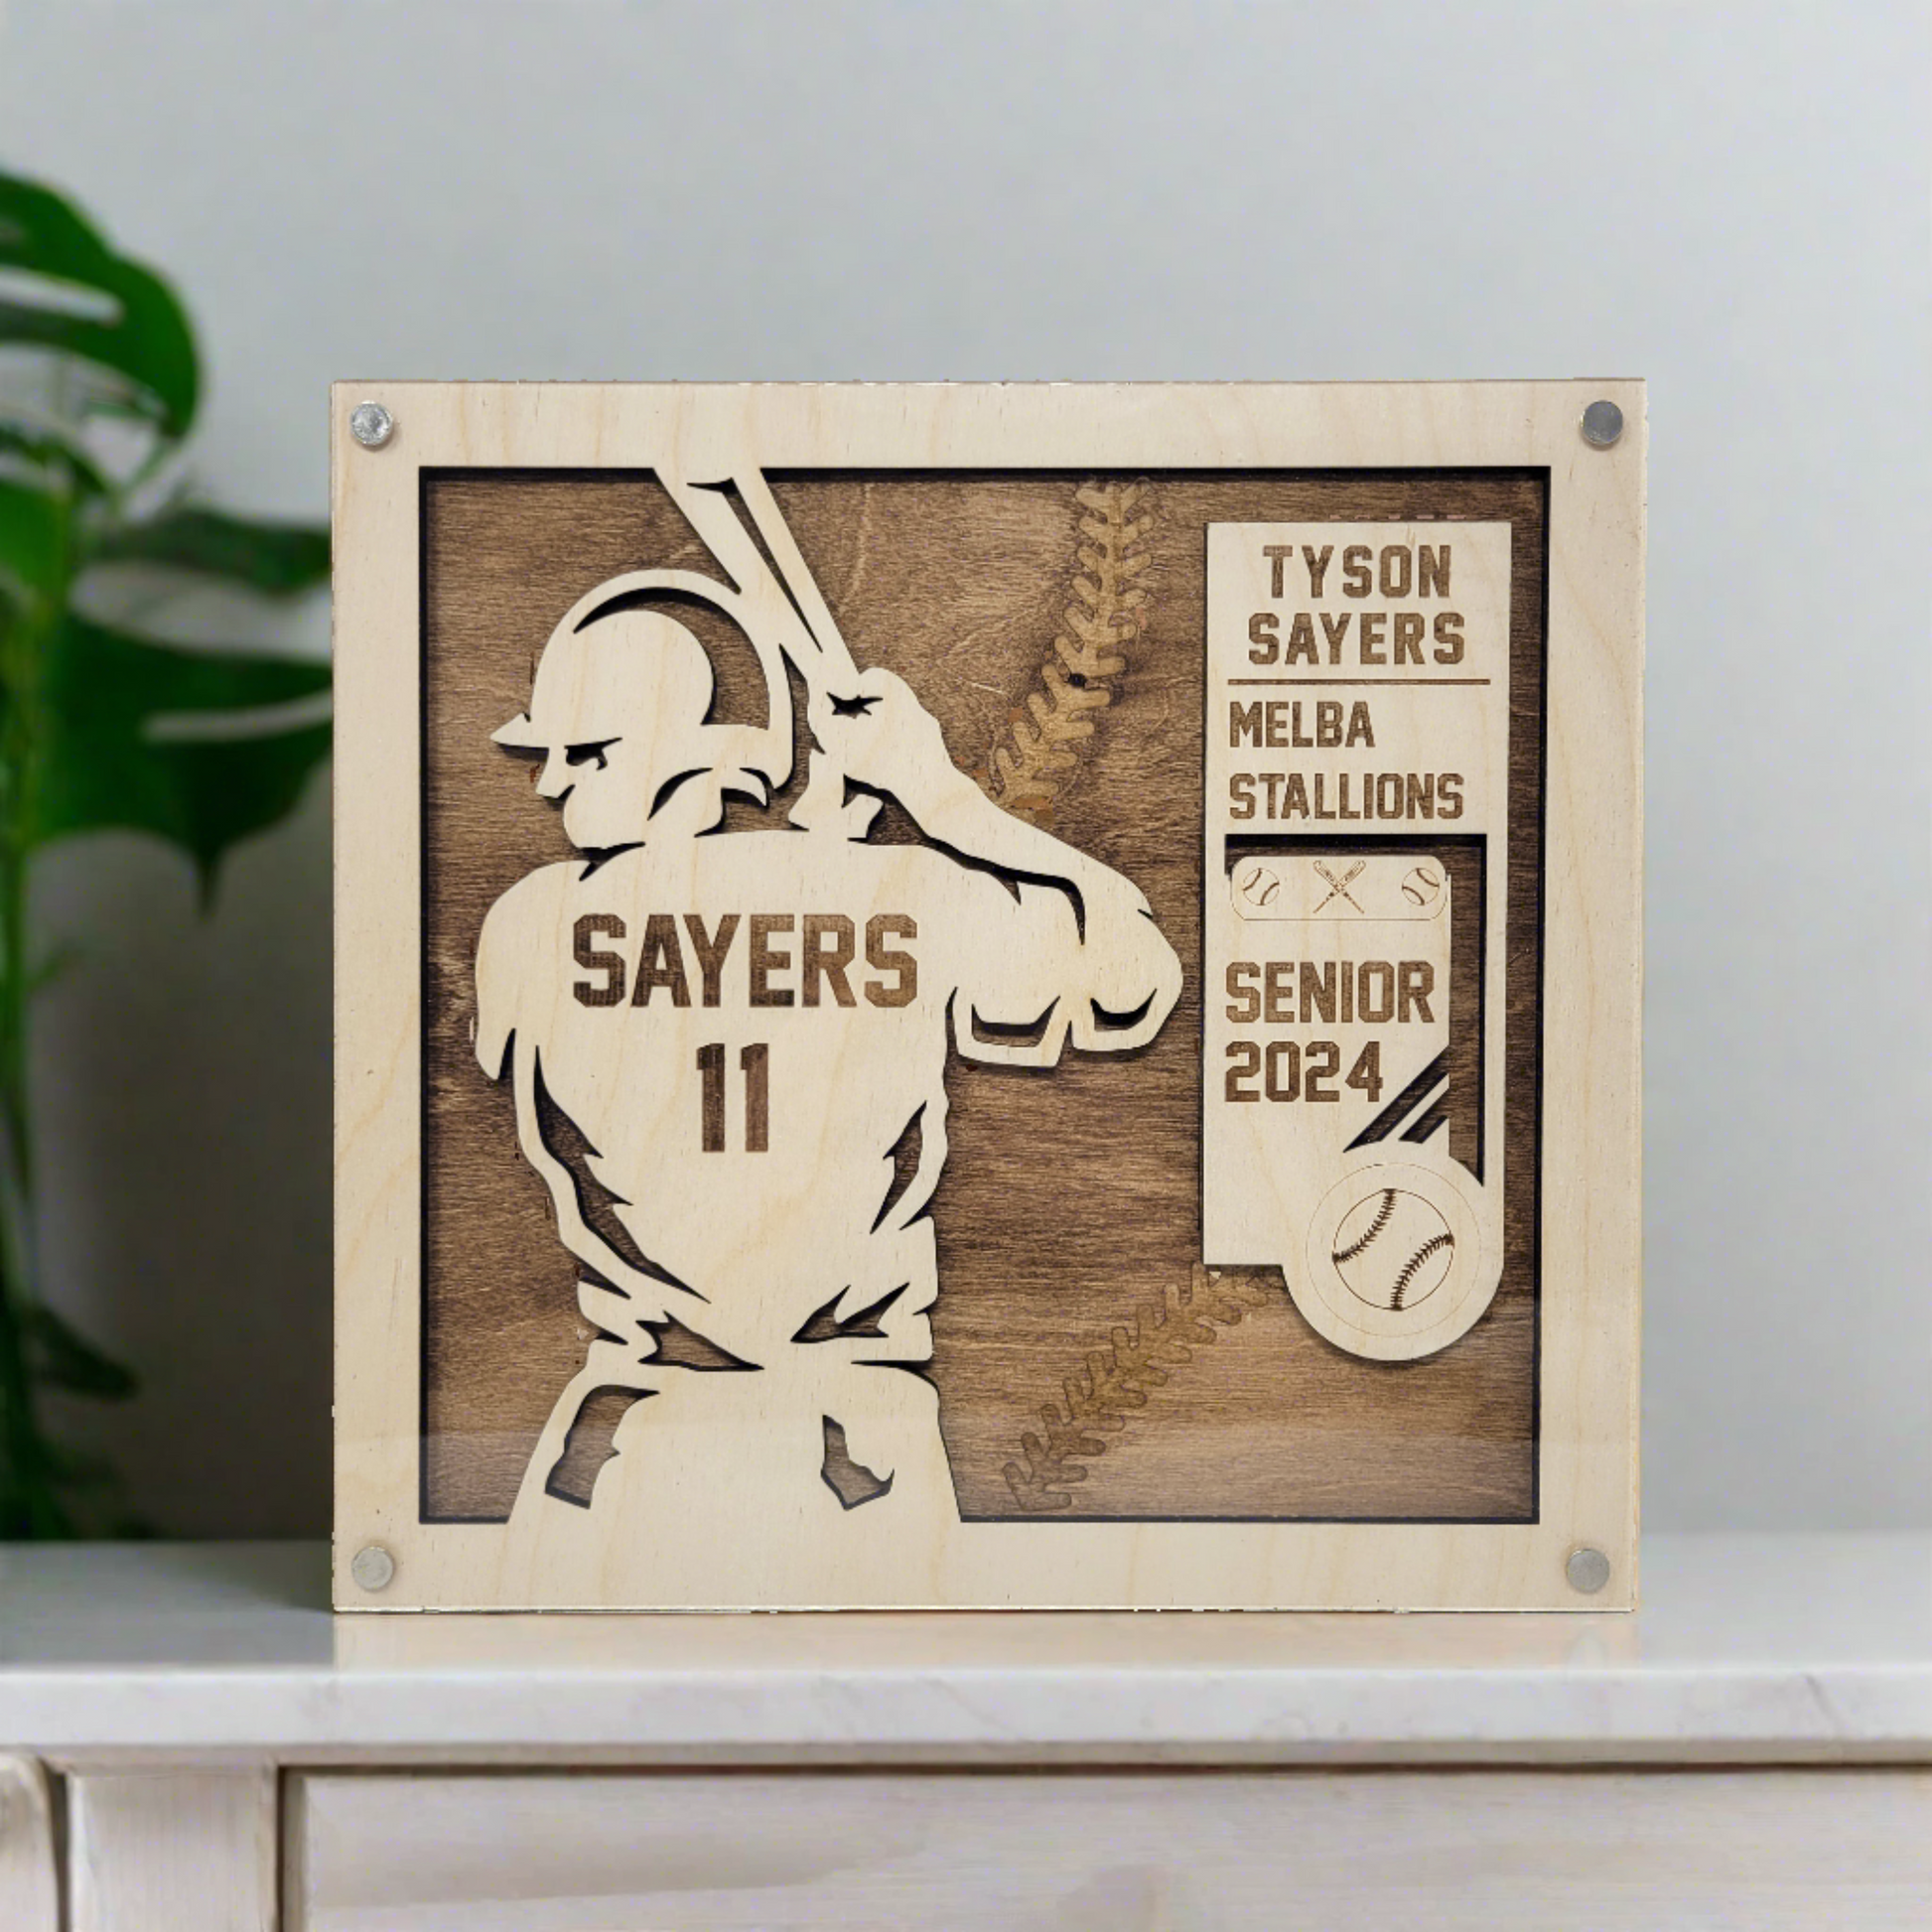 Personalized baseball player plaque with a stained background, professional photography, with a name, year, and team engraved, also personalized with a baseball logo, green plant in the background